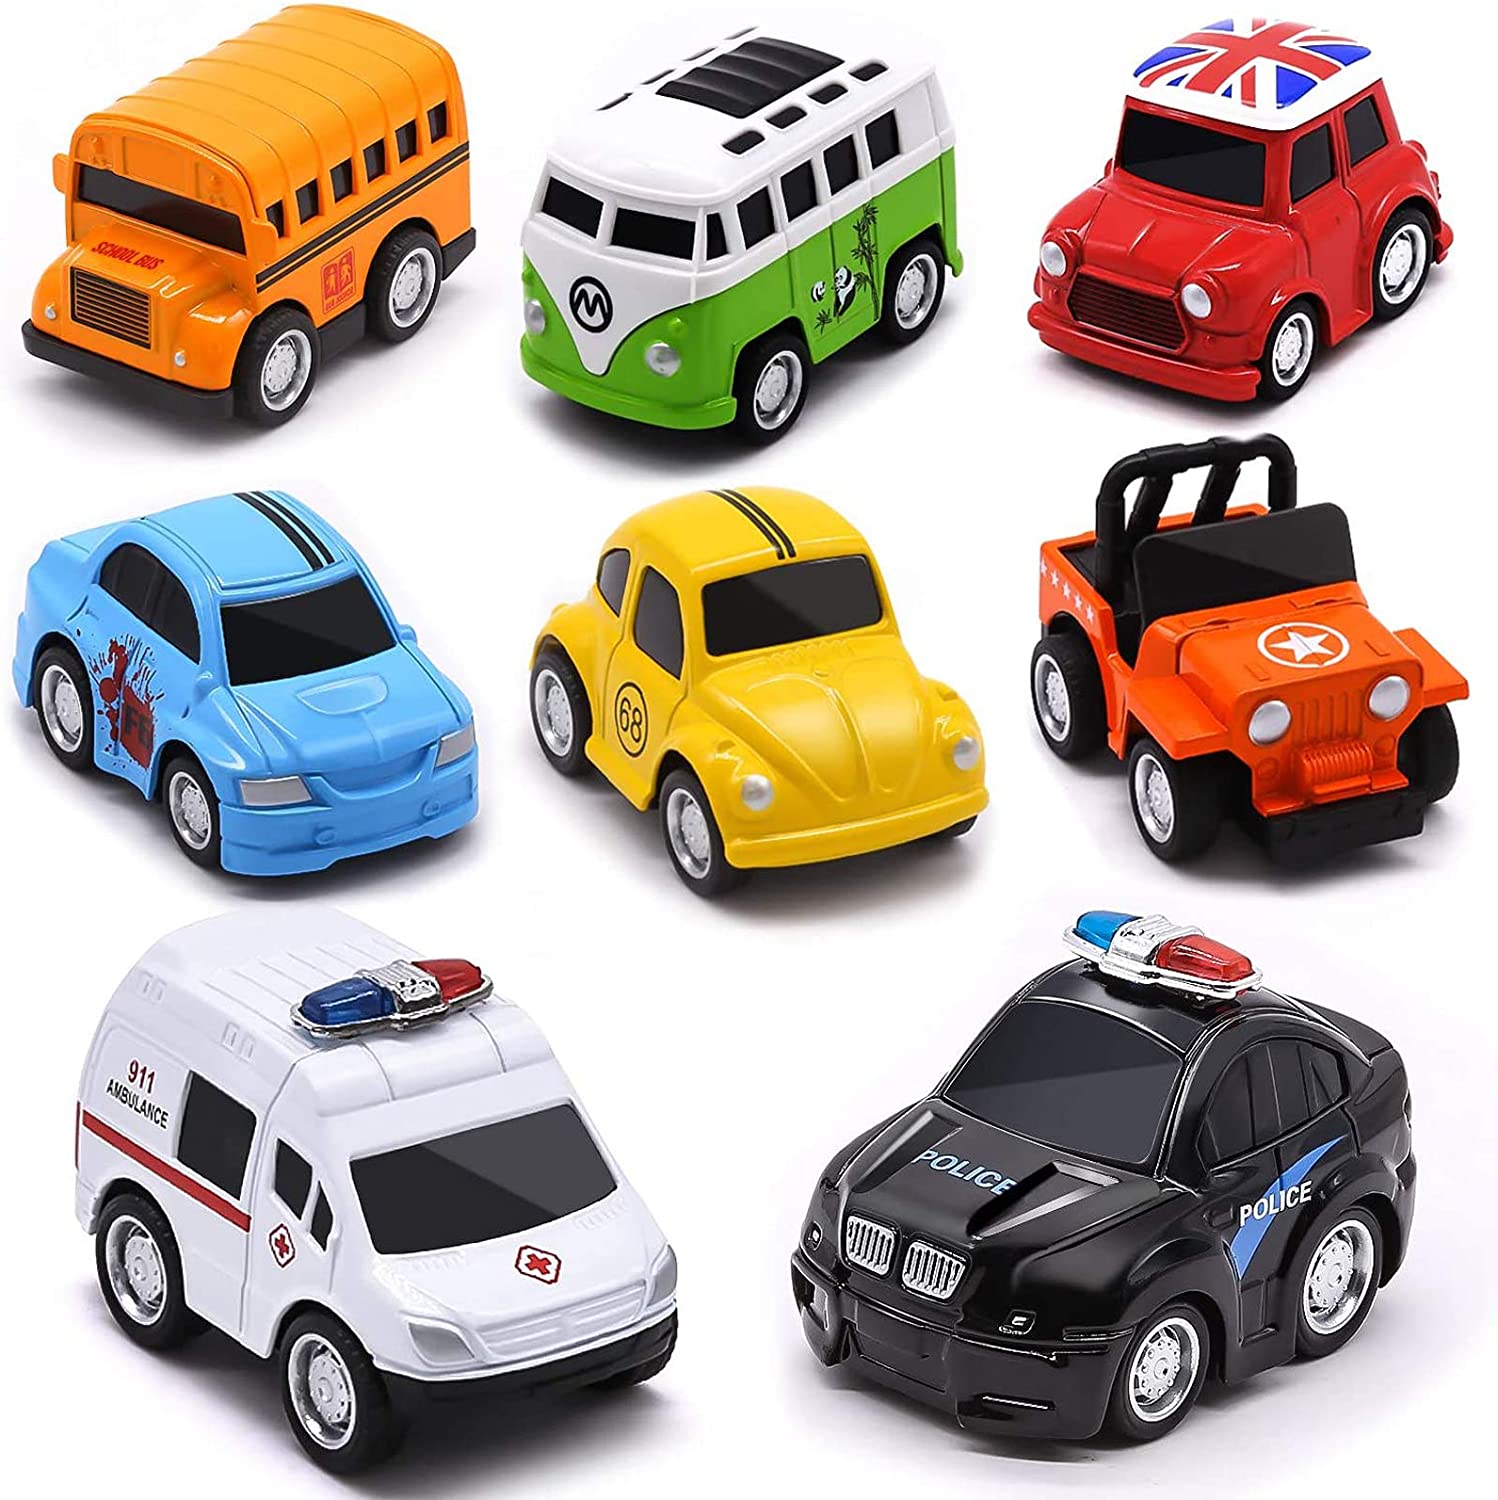 Die-cast Alloy Toy Vehicles Friction Powered Toy Monster Trucks, Buses, and Cars for Toddlers & Boys